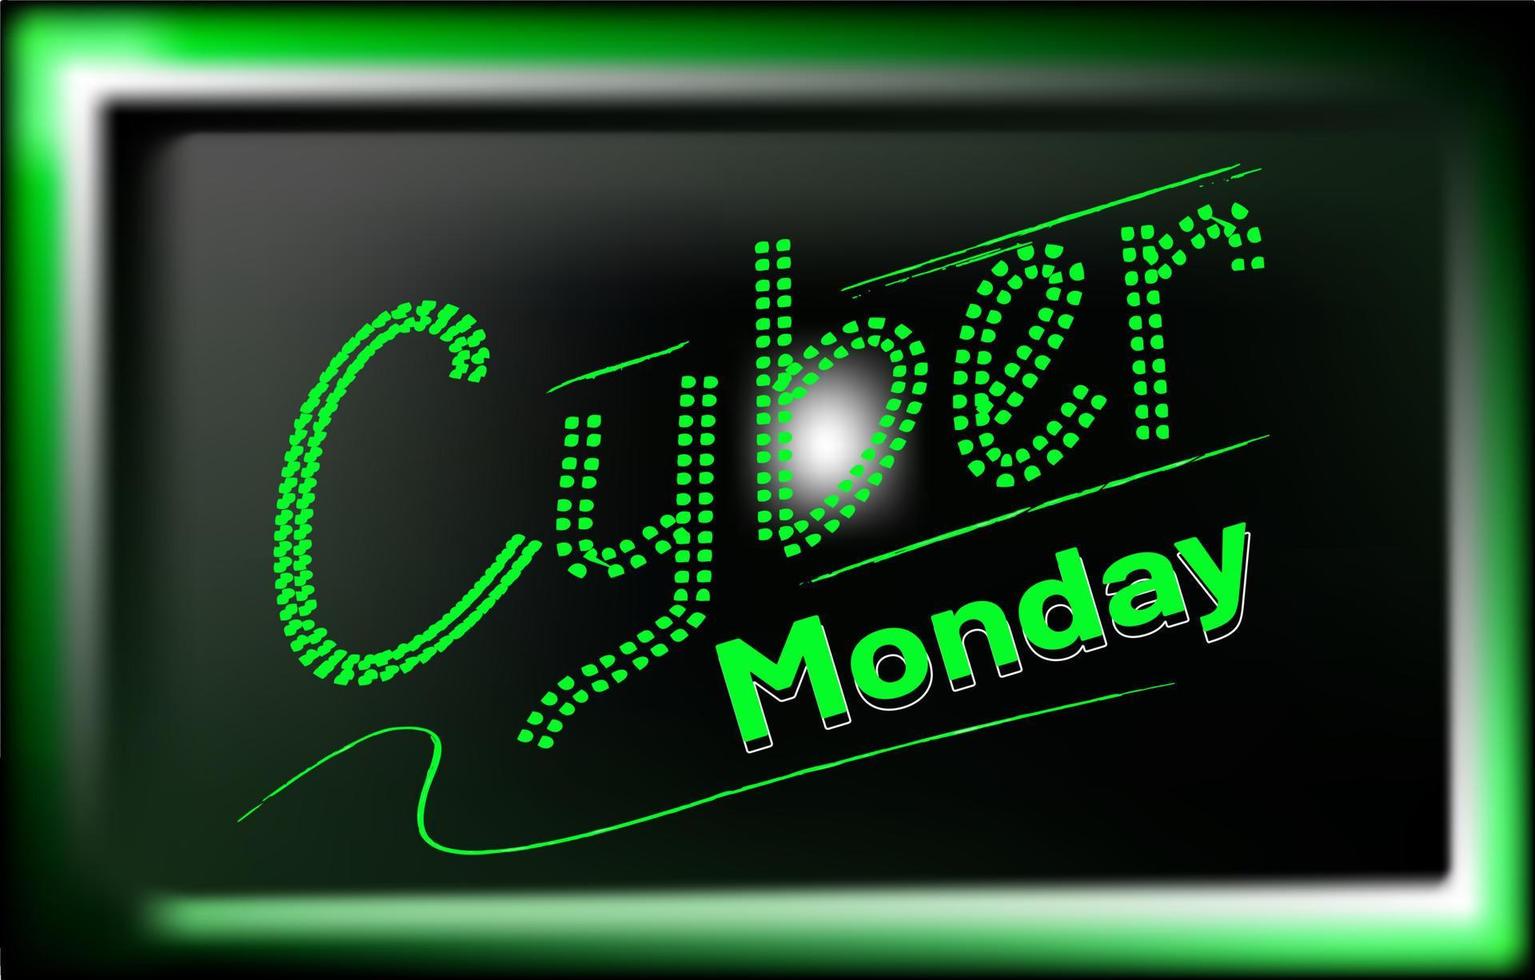 Cyber Monday Sale, Discount Shopping Commercial or Label. Green Light Digital Style Text vector